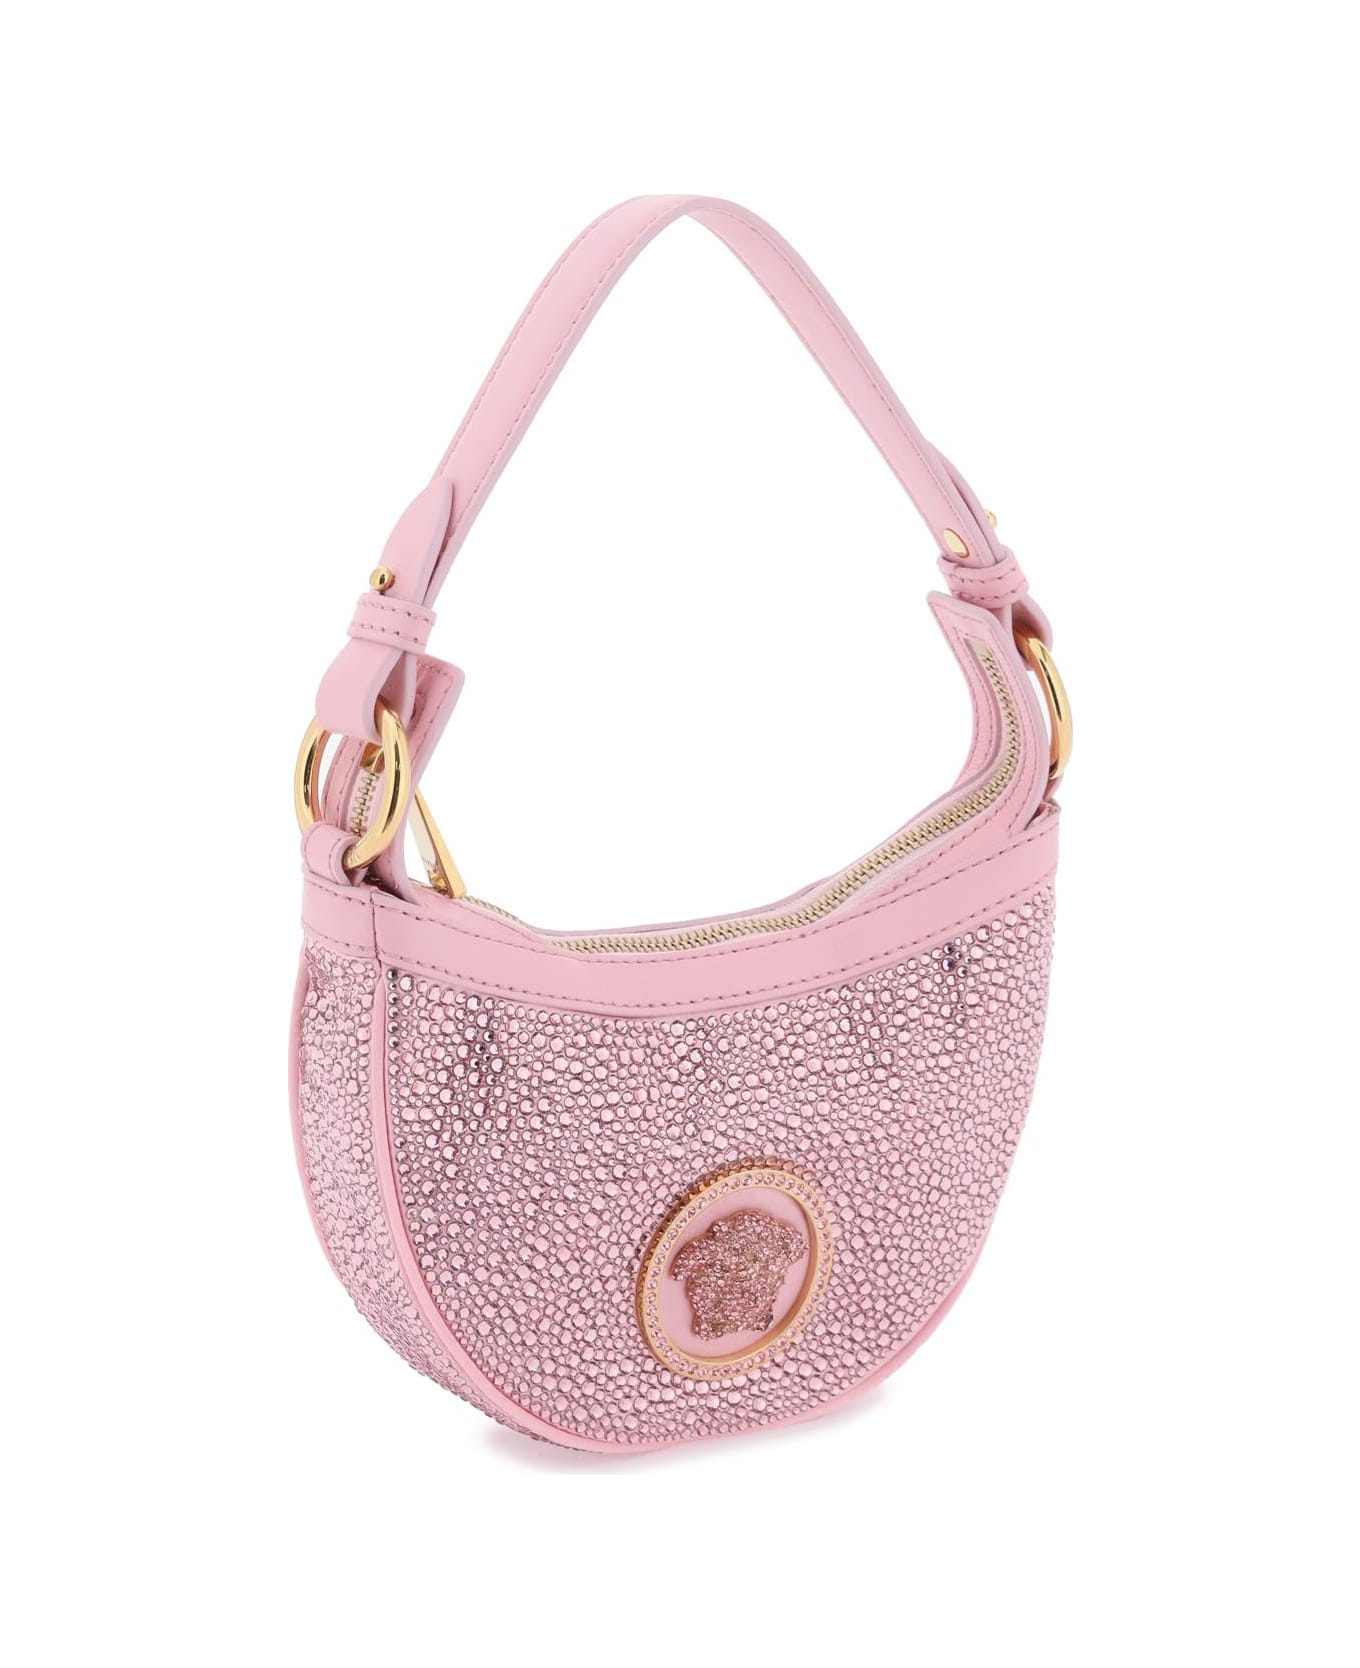 Versace Repeat Mini Hobo Bag With Crystals - PALE PINK VERSACE GOLD (Pink) トートバッグ